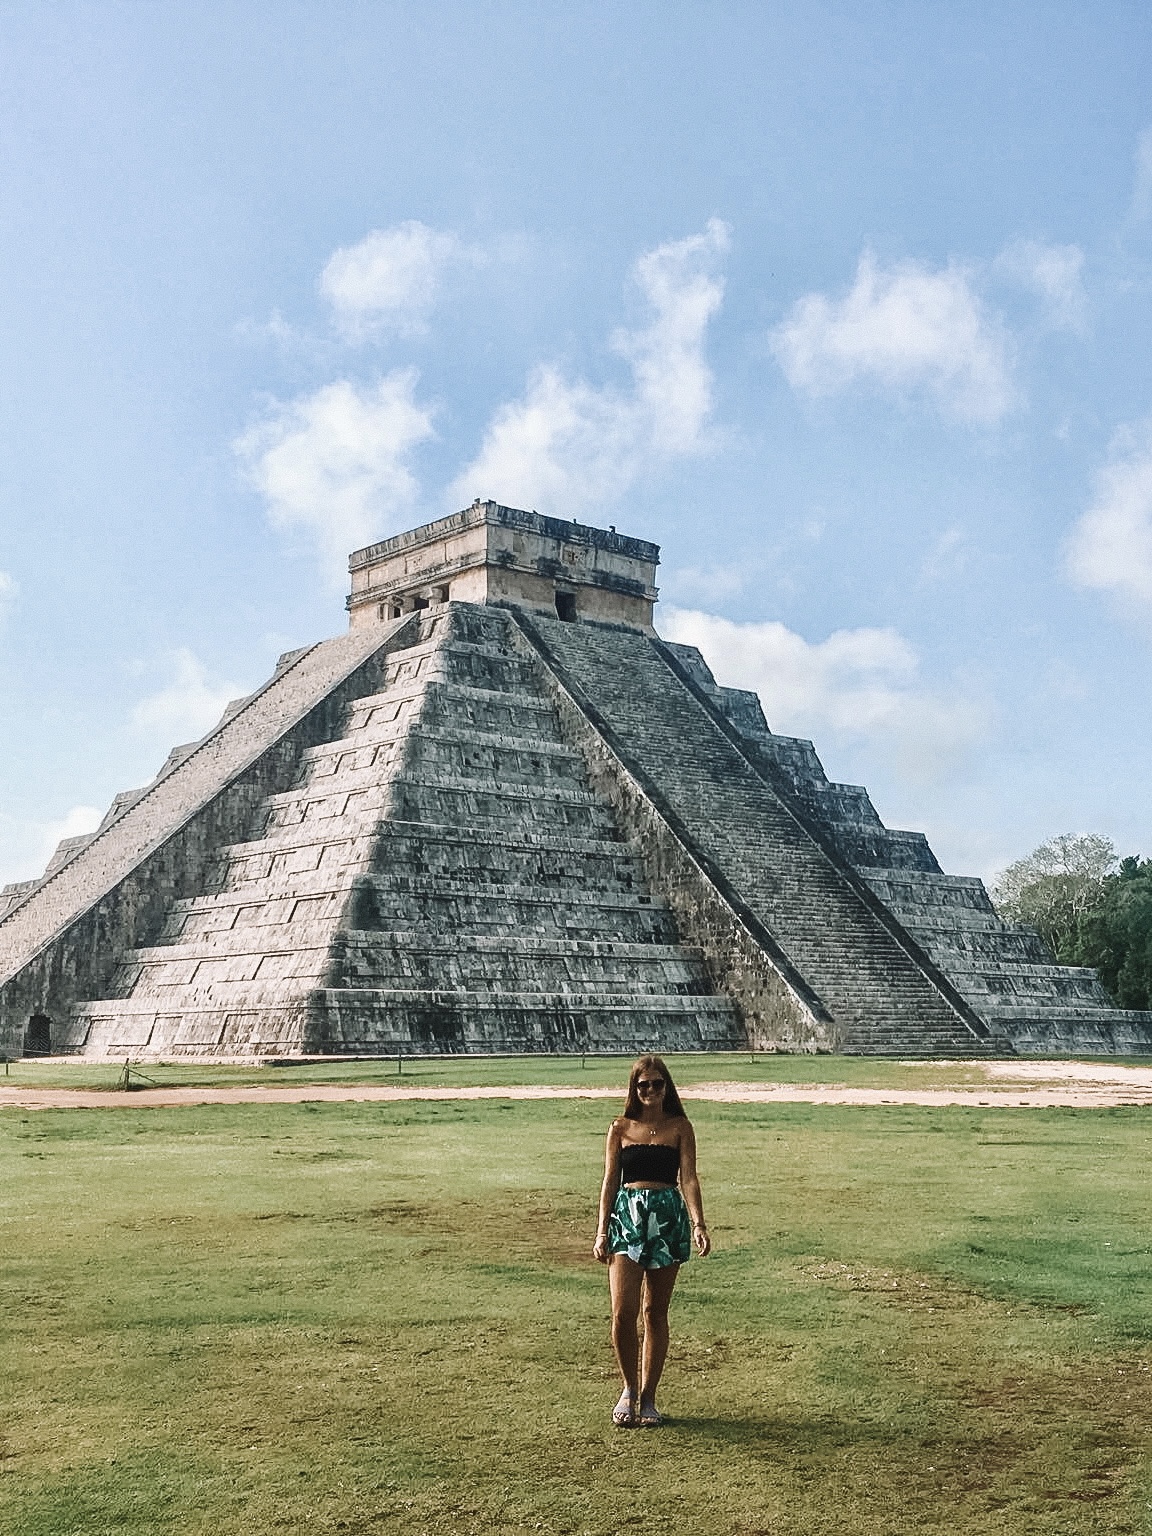 Niki stands in front of Chichen Itza pyramids, Quintana Roo, Mexico